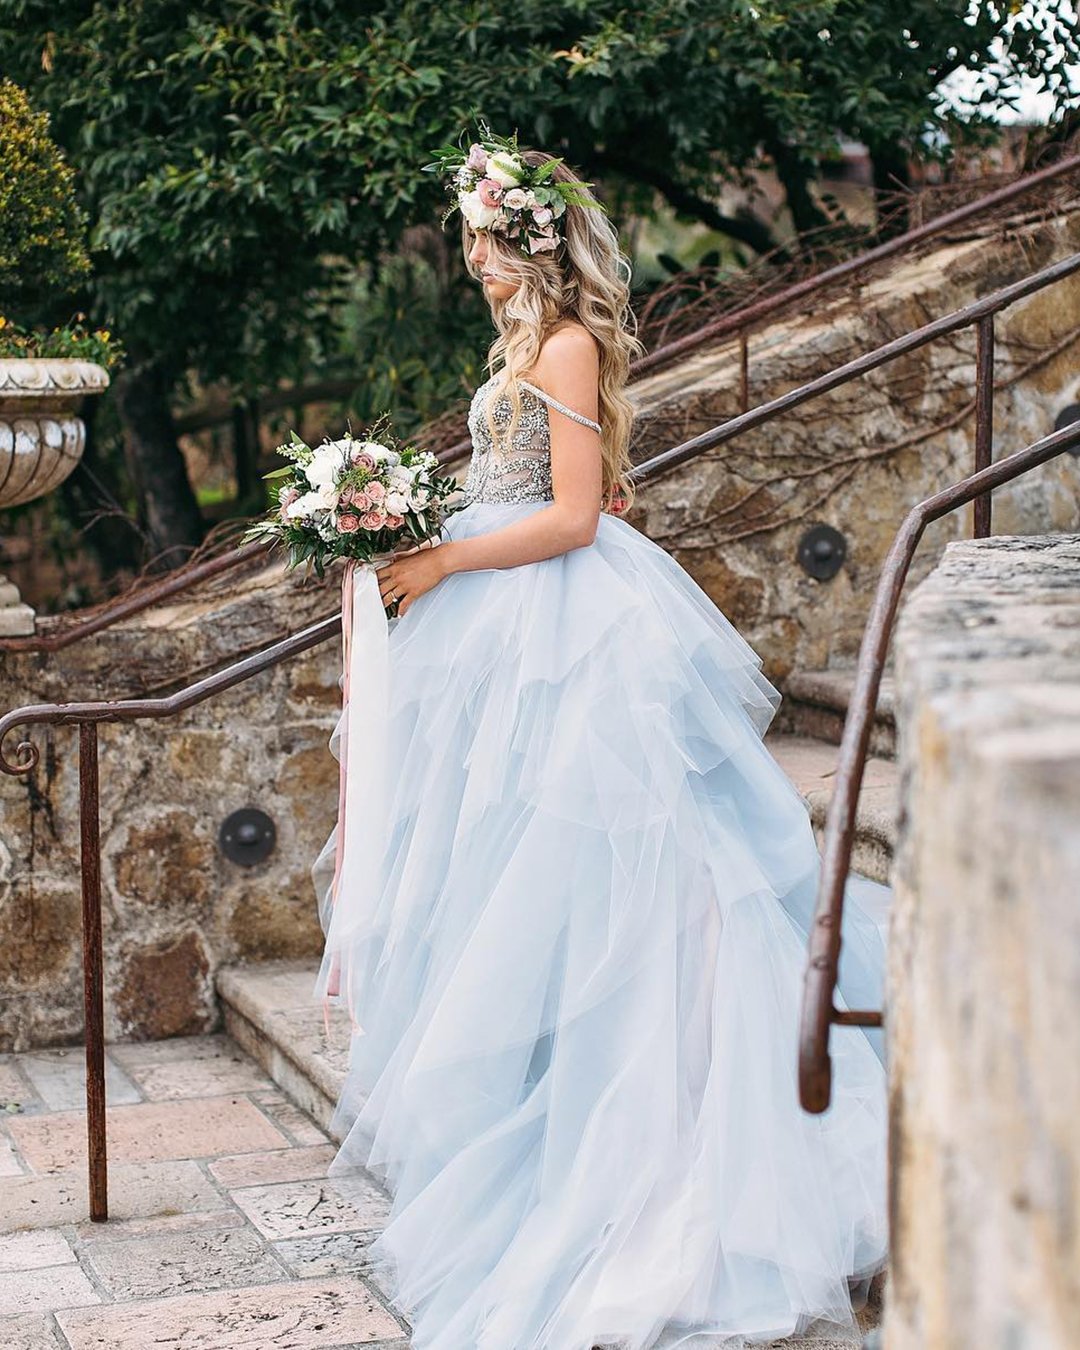 blue wedding dresses ball gown ruffled skirt sequins top annaperevertaylo